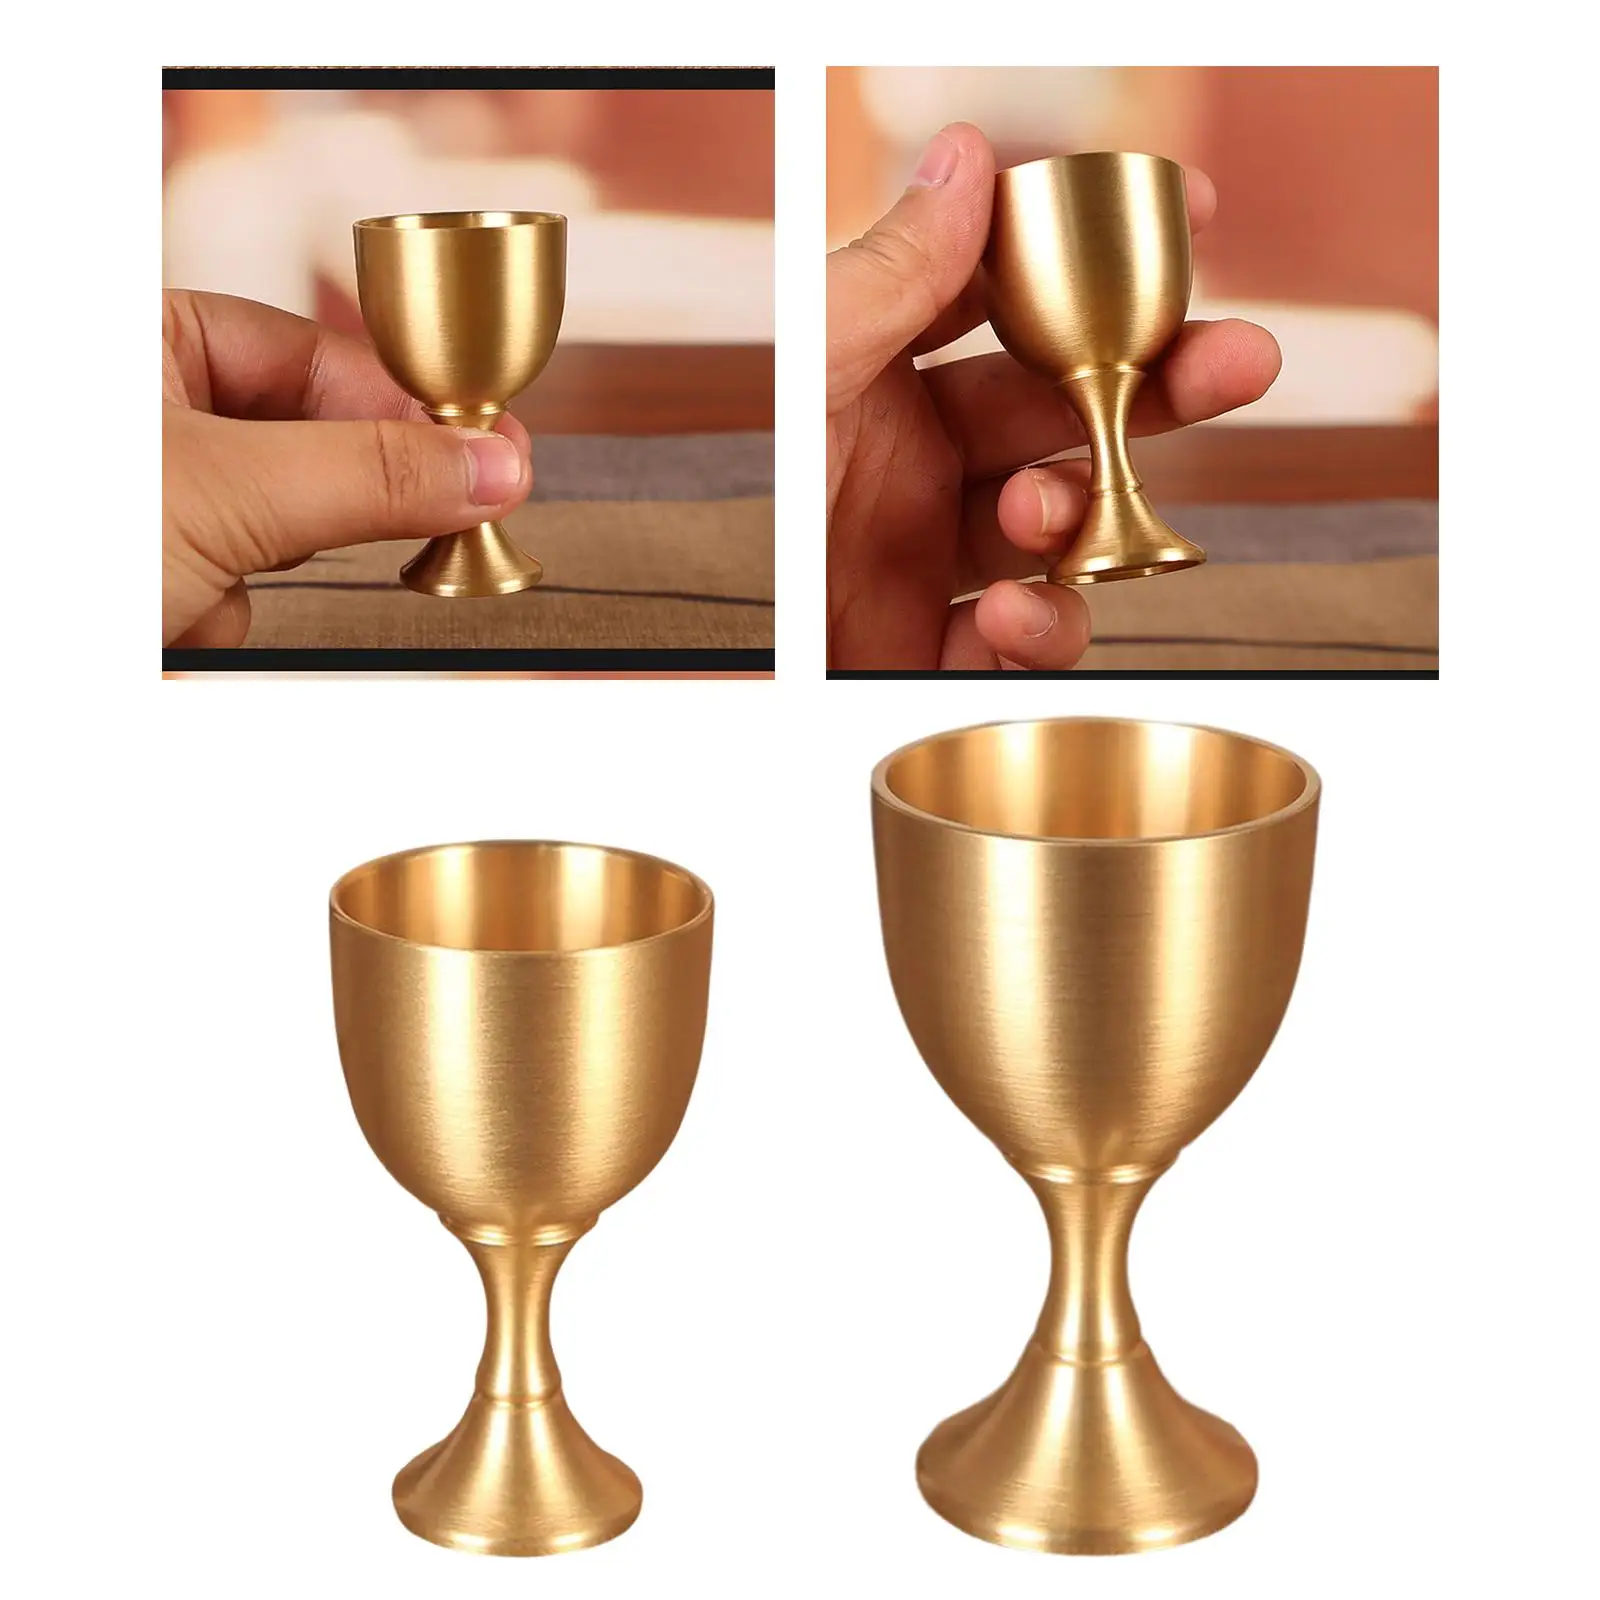 Classic Brass Wine Glasses Drinking brass Handmade Durable Liquor Tumbler for Club Party Home Cocktail Decor Props